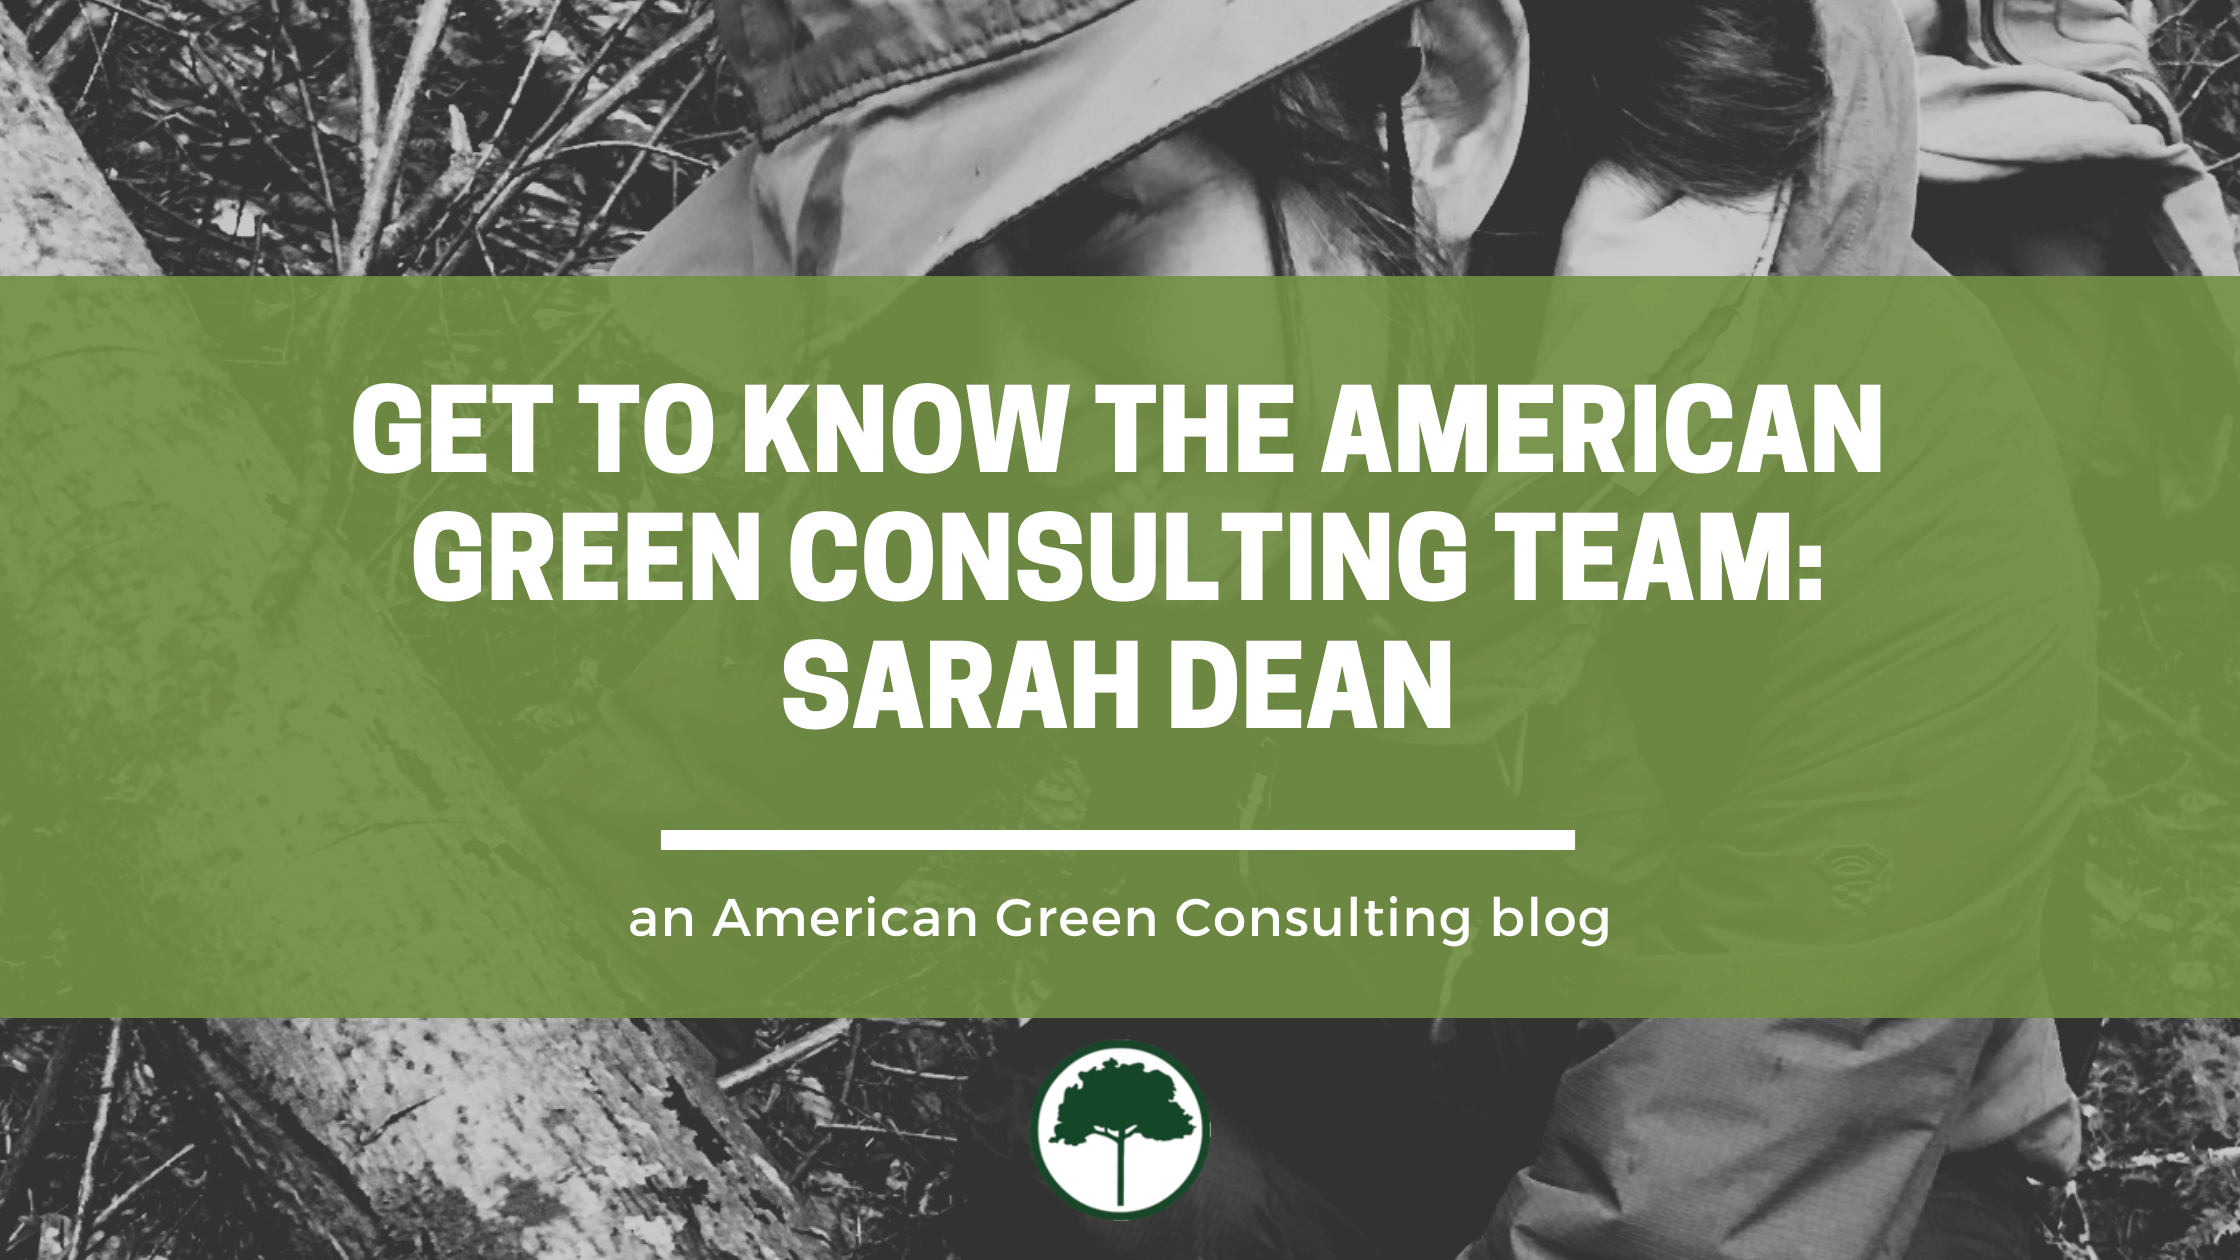 Get to know the American Green Consulting Team: Sarah Dean